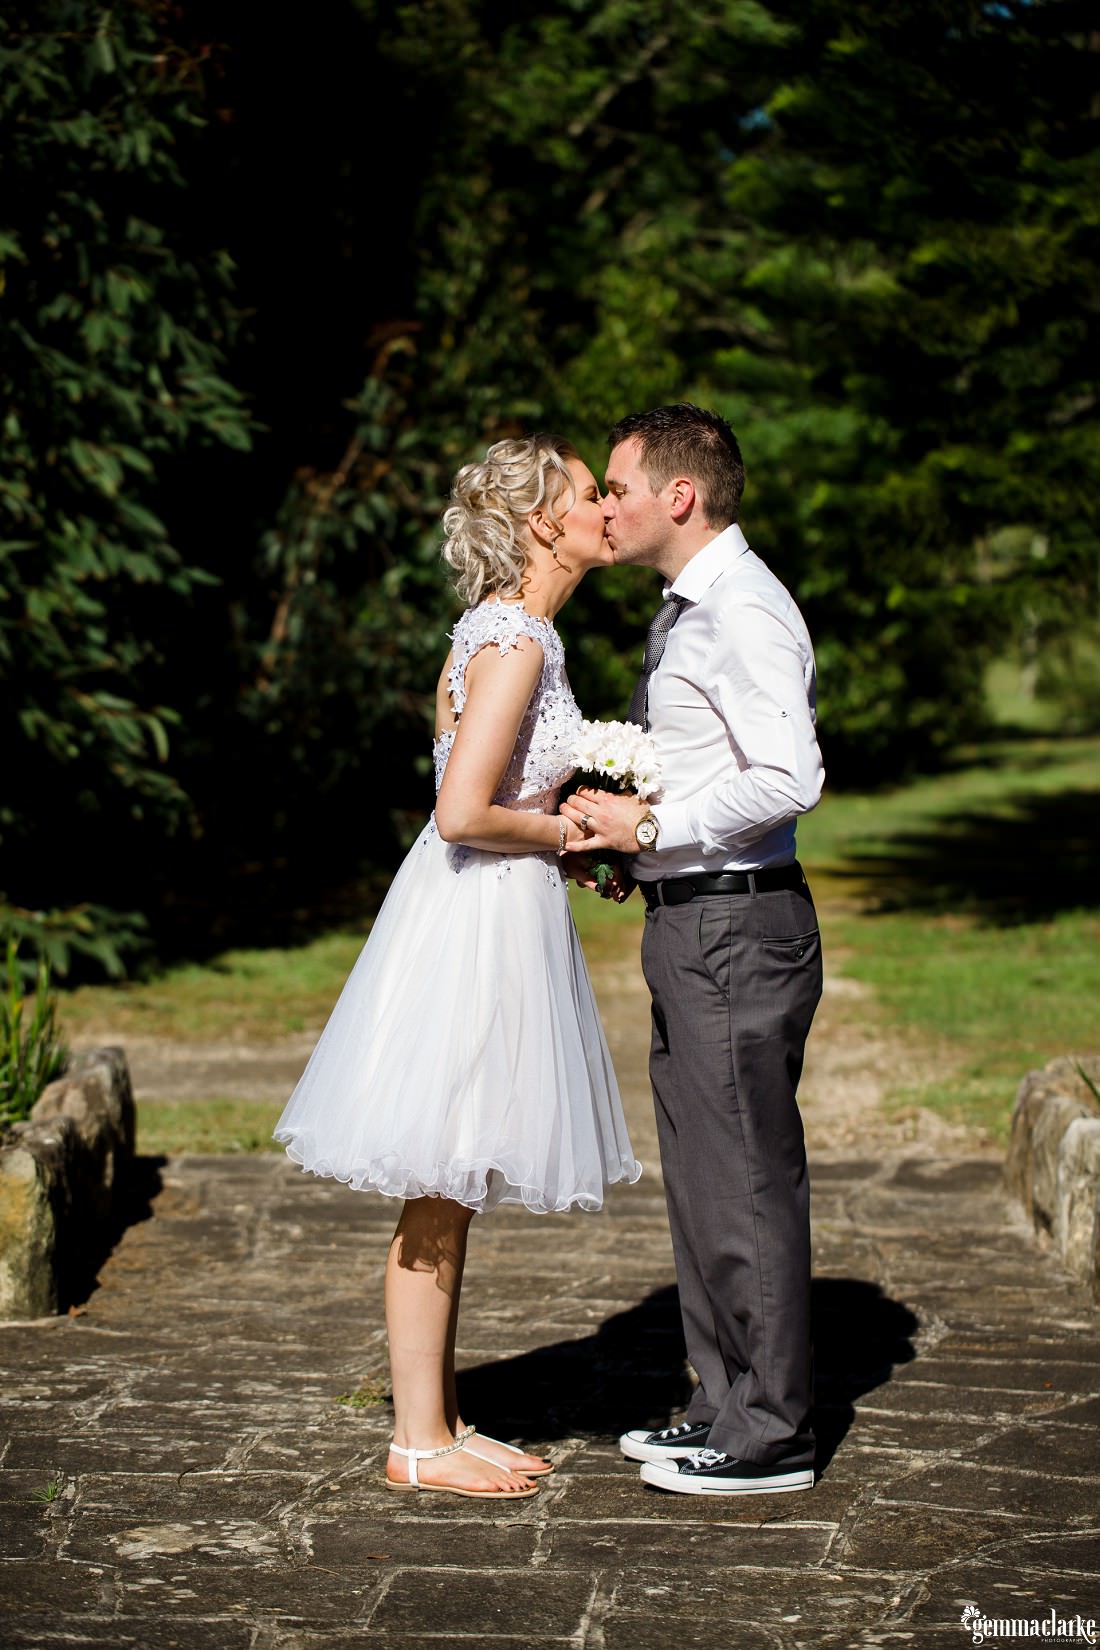 A bride and groom holding hands and kissing in a garden